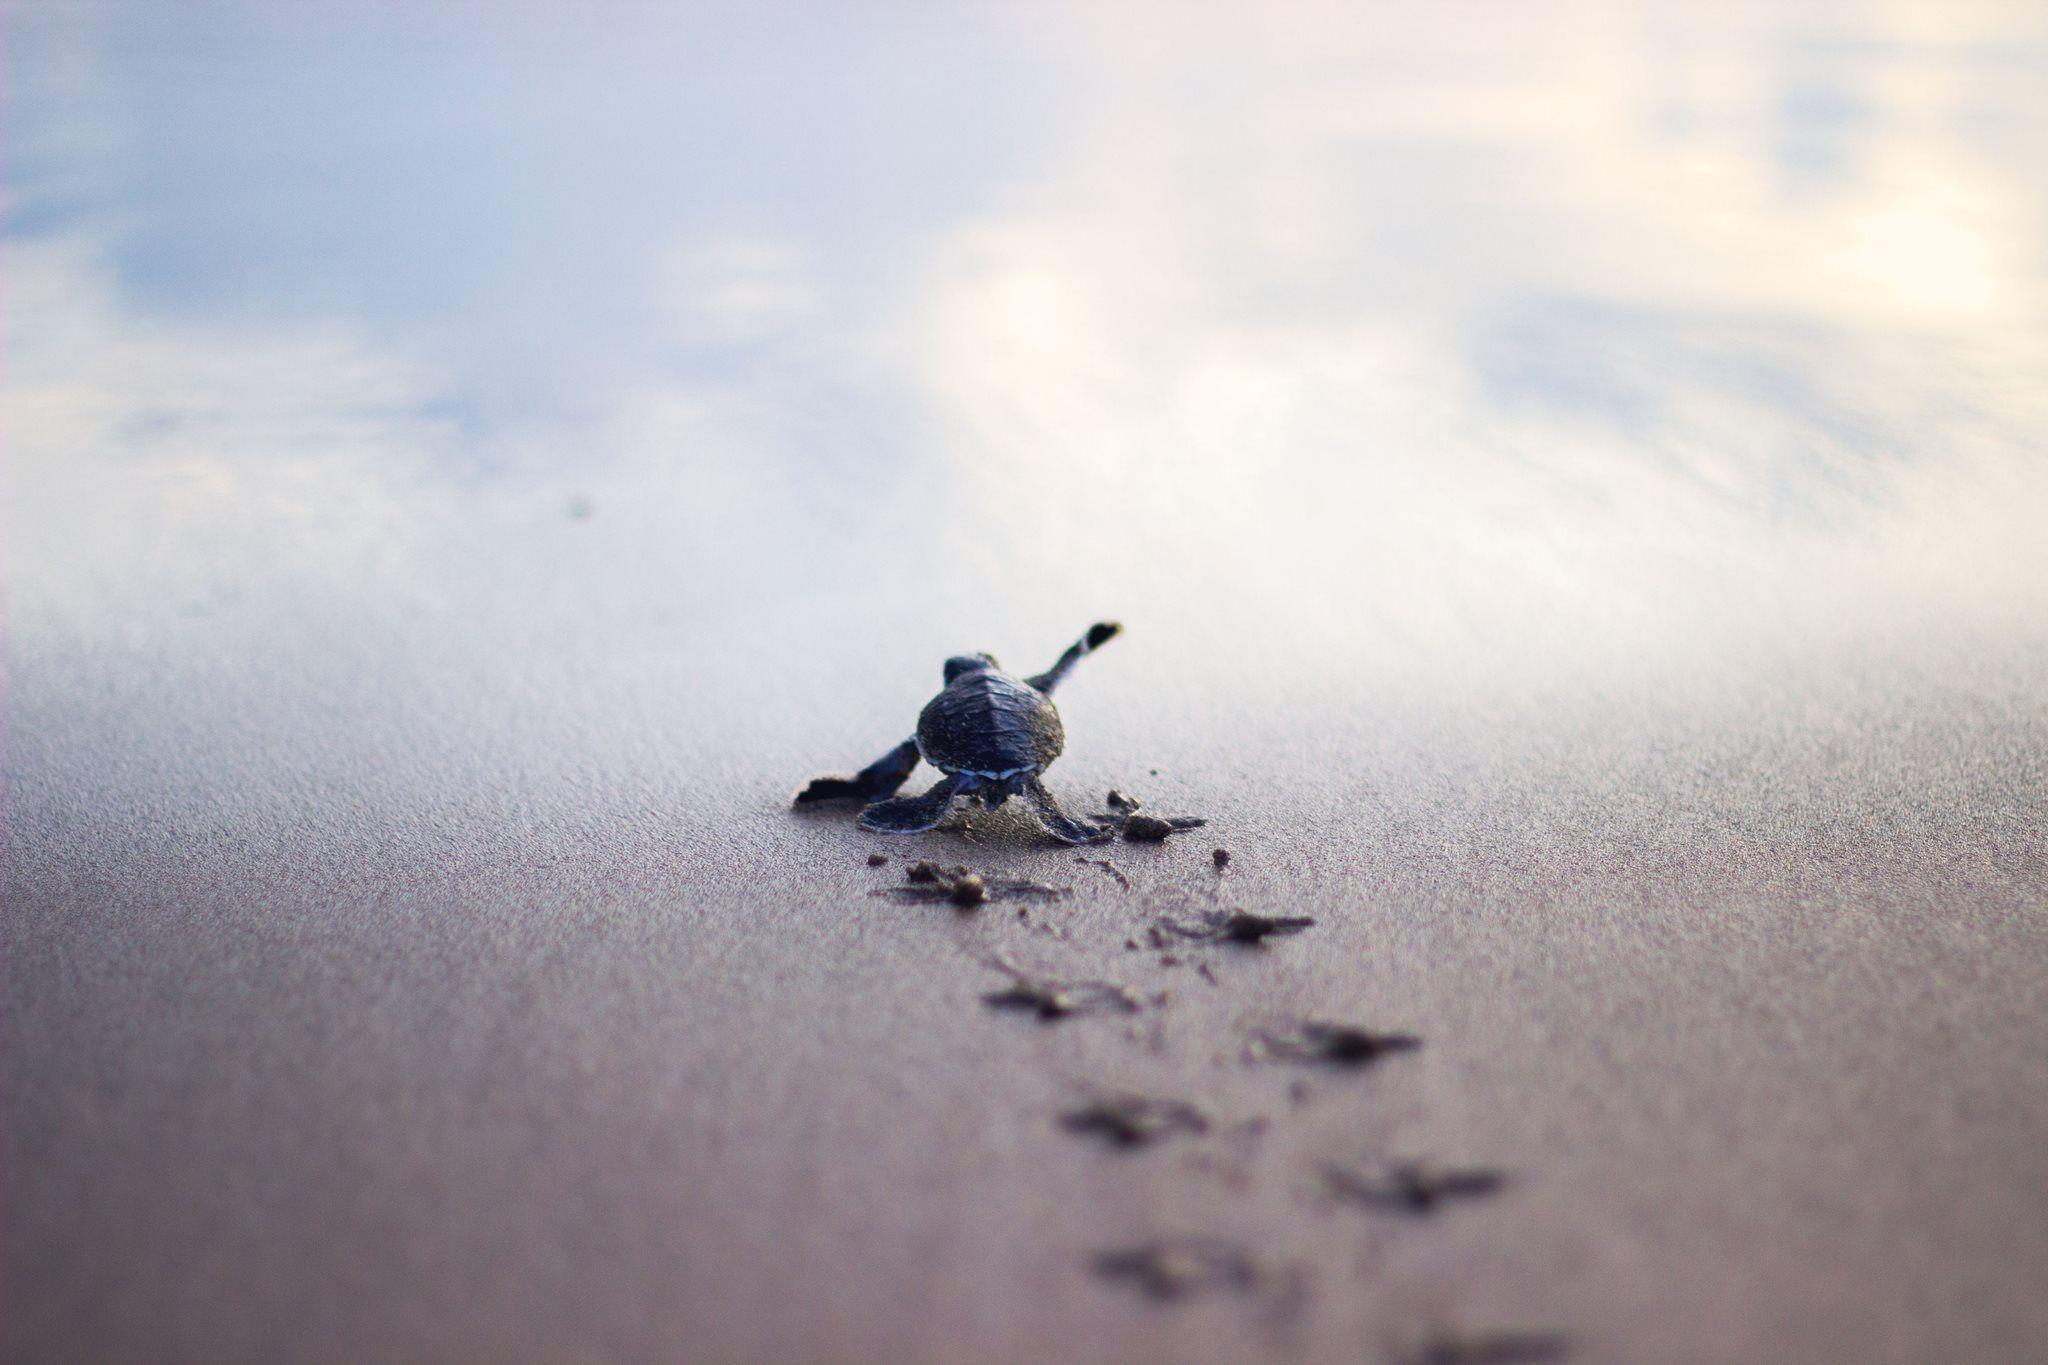 My girlfriend took this picture of a baby turtle desperately